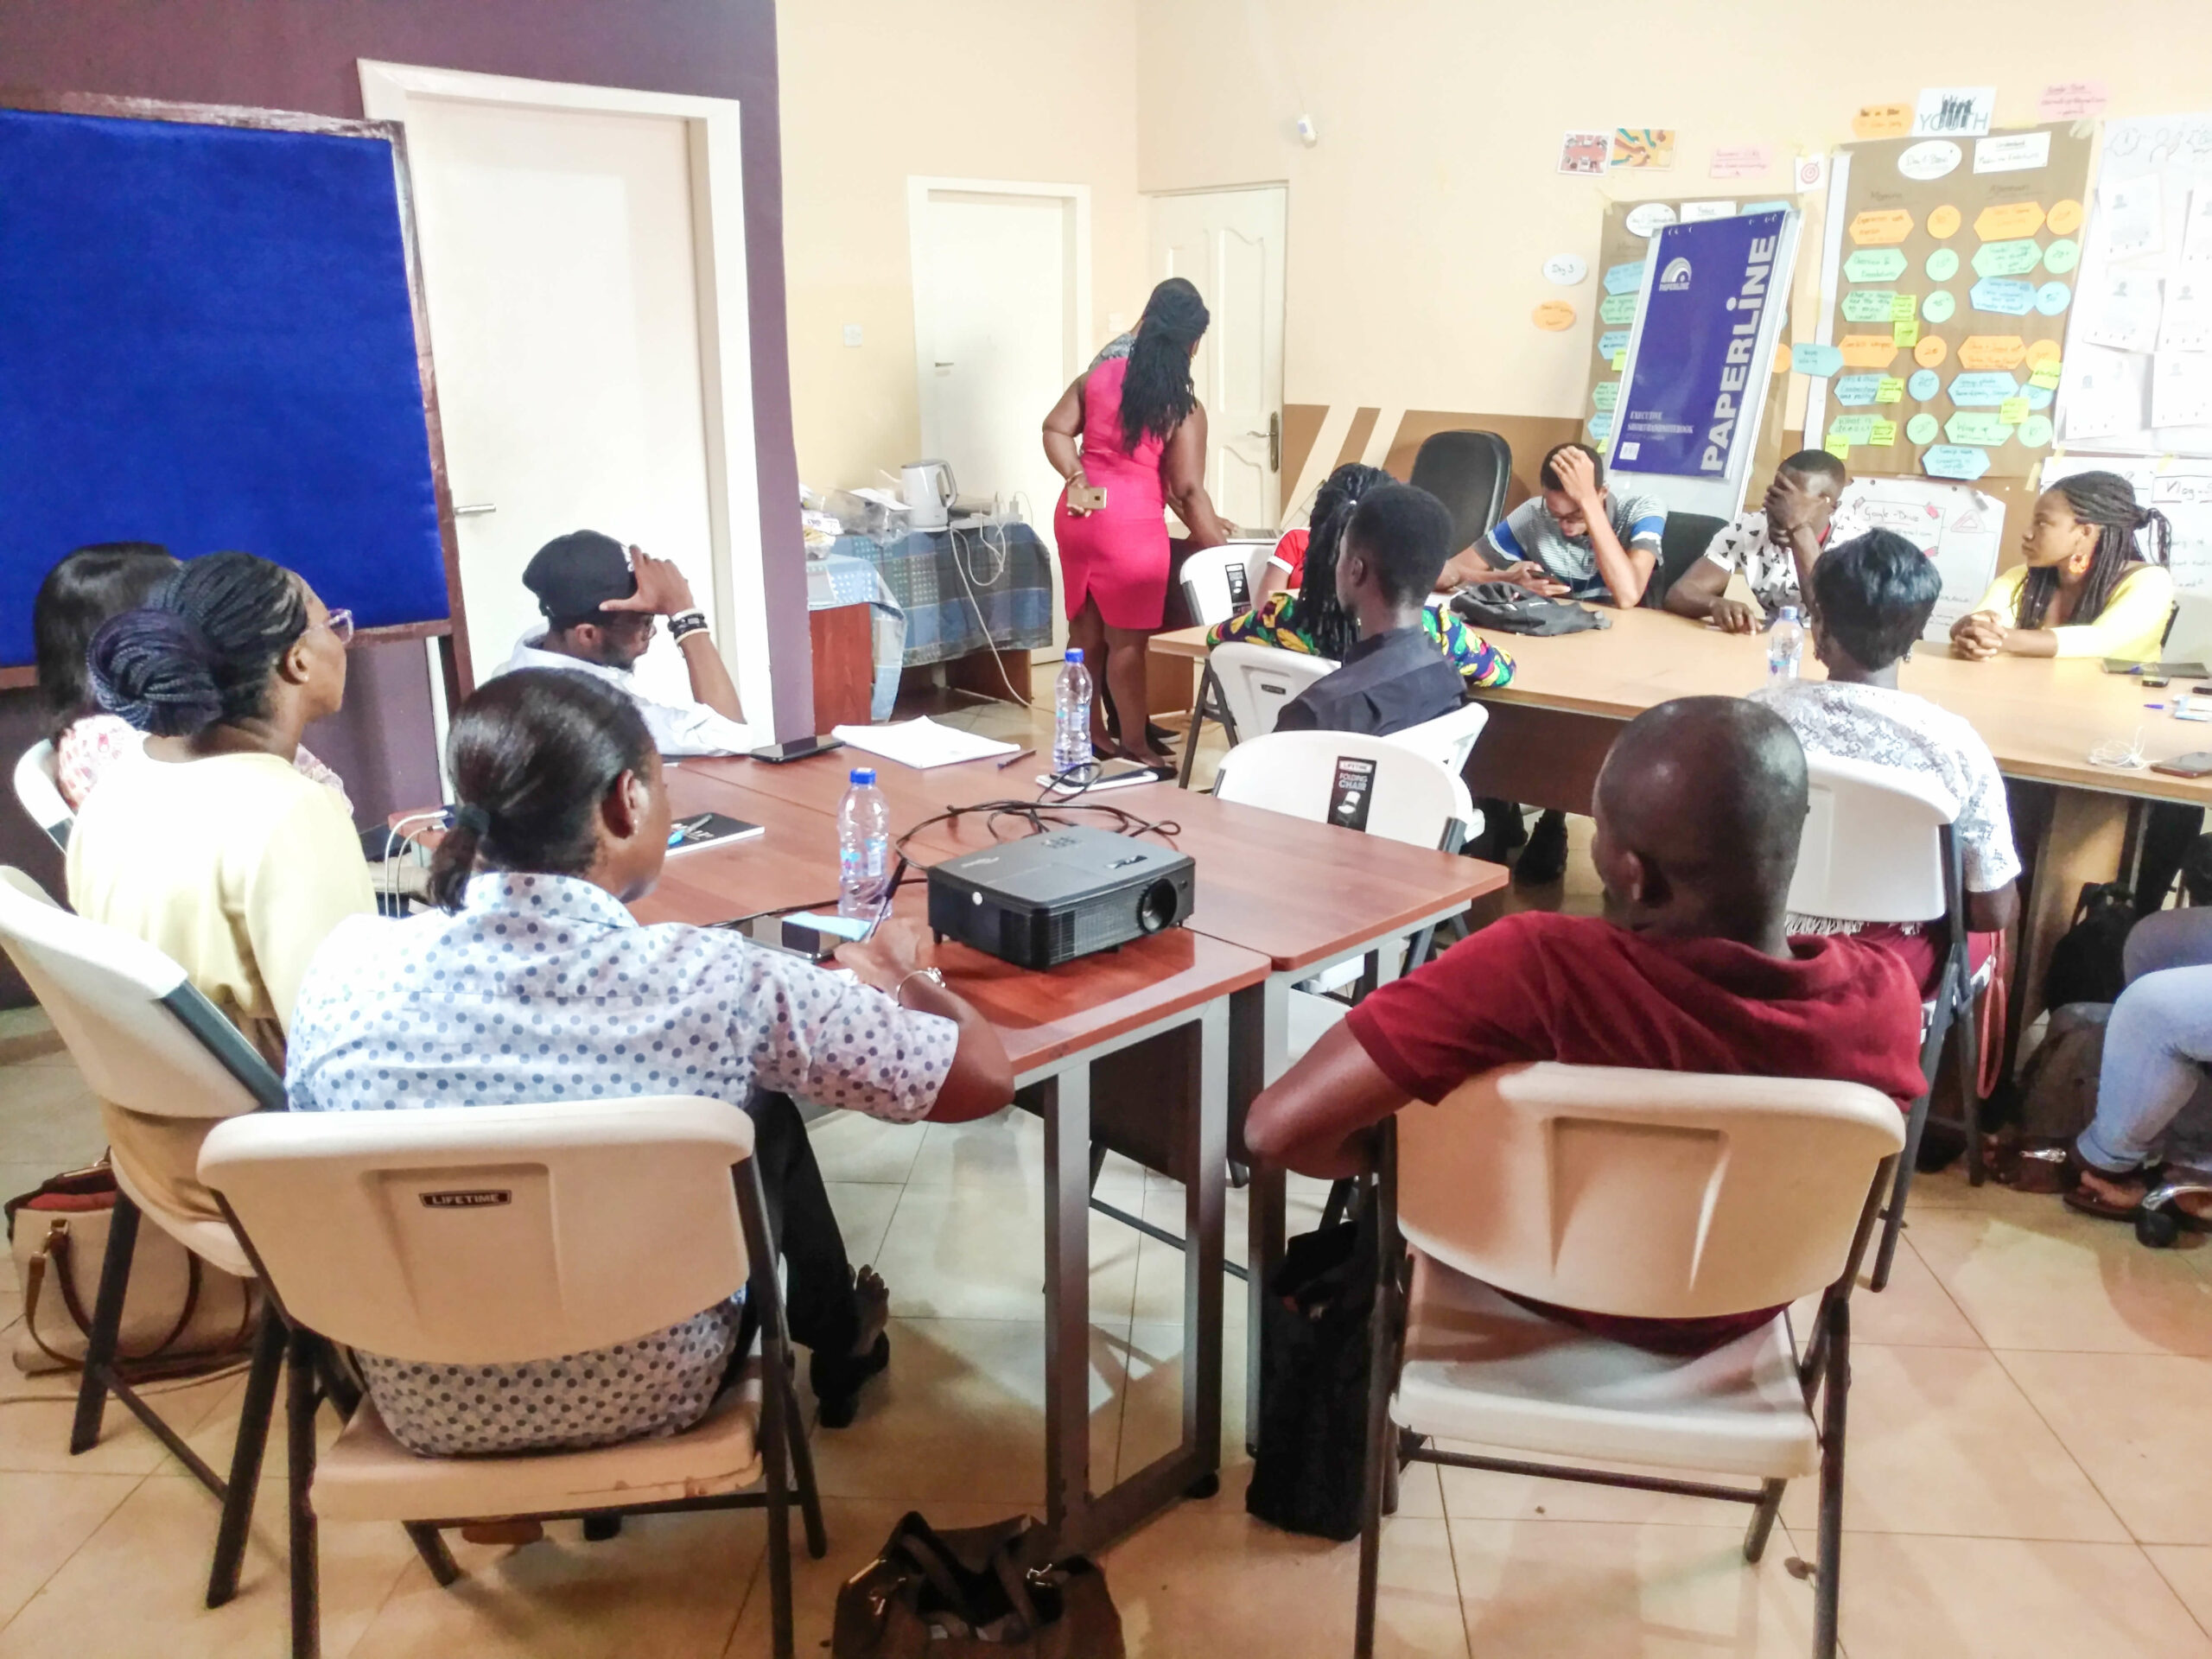 Penplusbytes trains youth on Ethical Video Production under MiL Youth Project